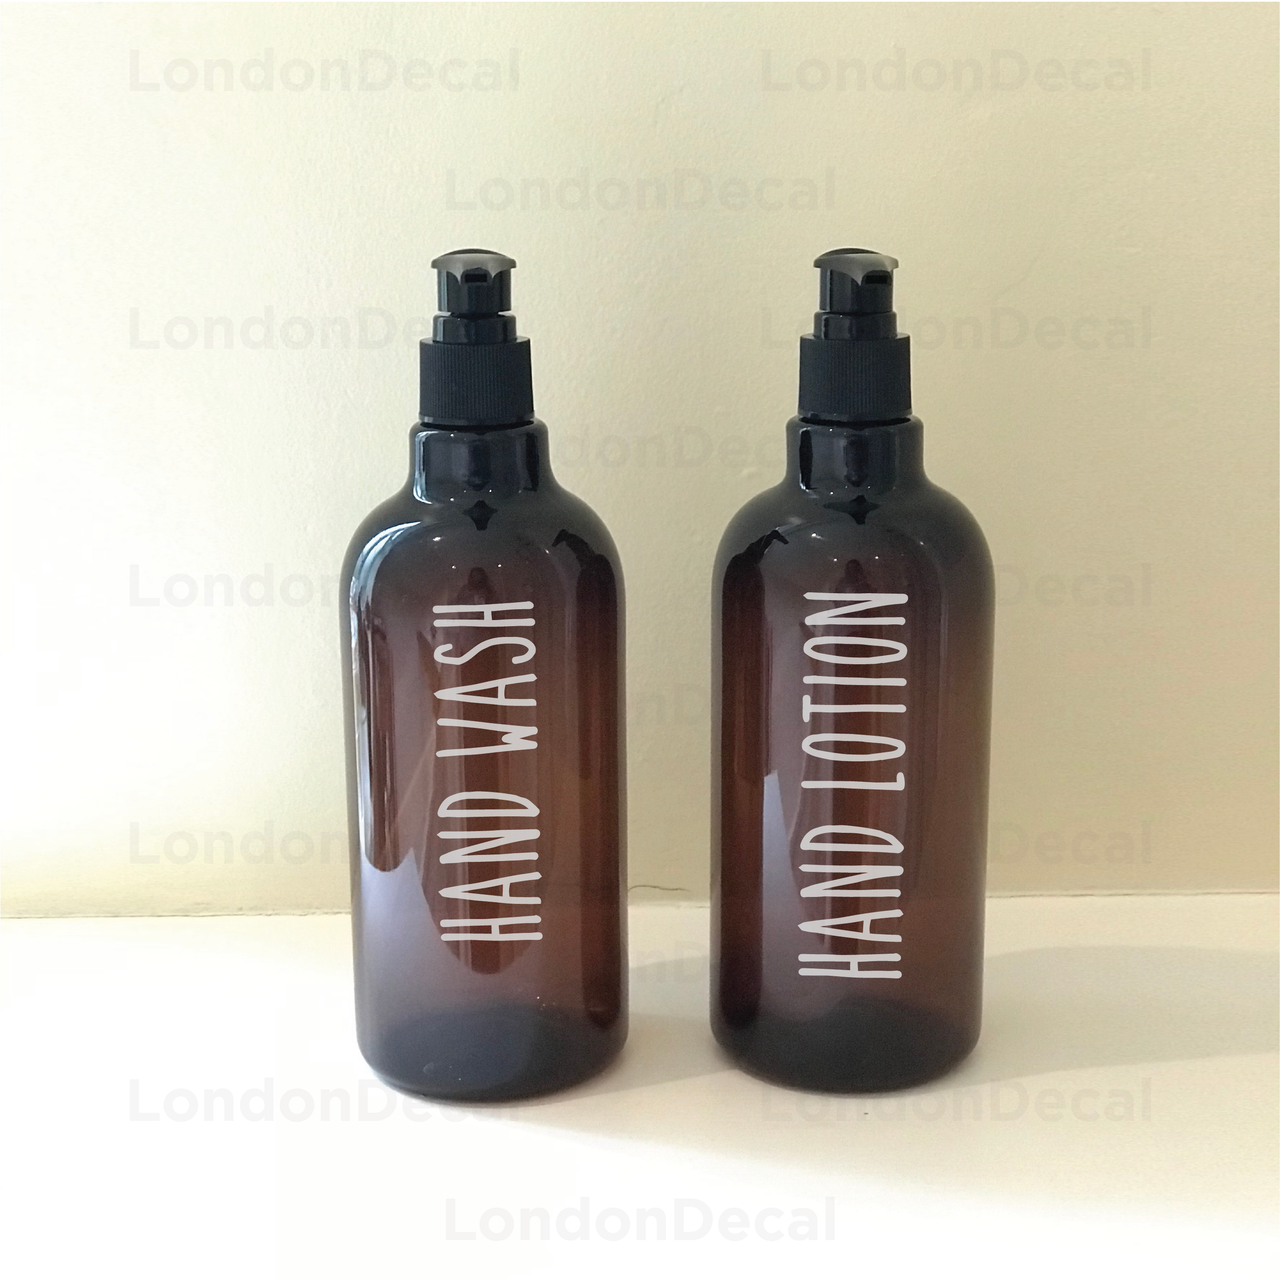 HAND WASH and HAND LOTION - Mrs Hinch inspired bottle decal stickers (Type 5)